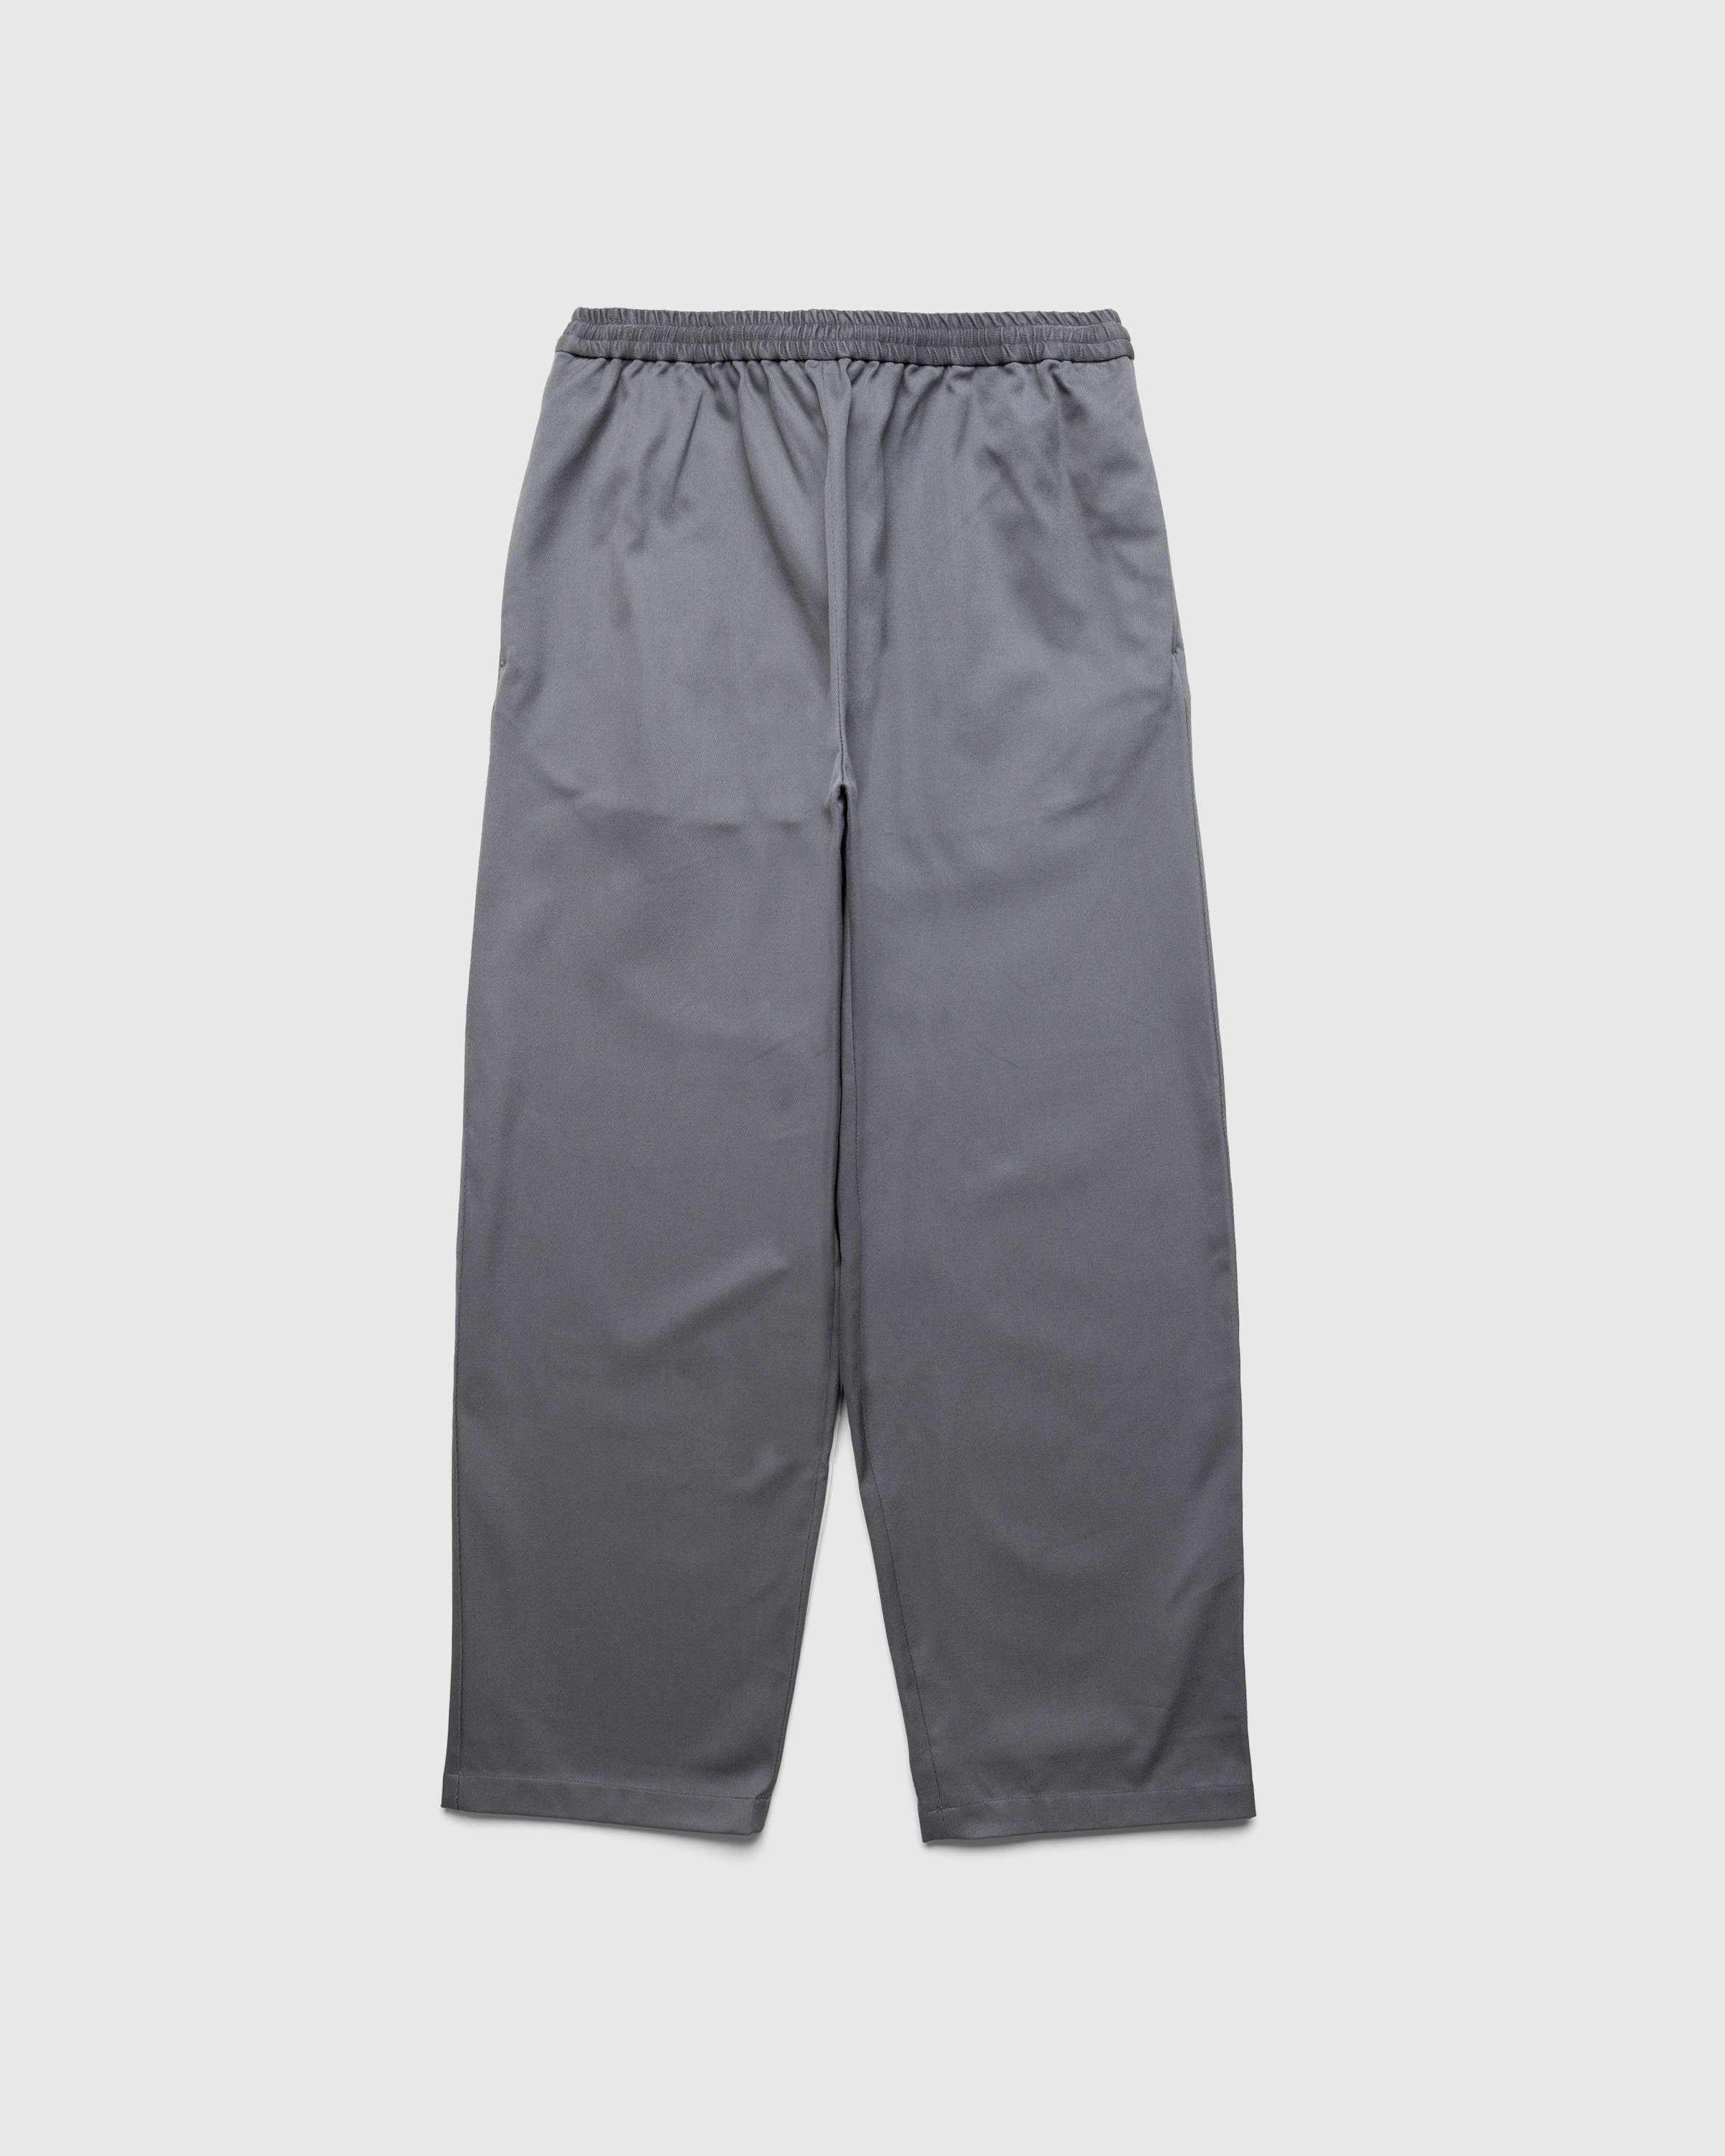 Acne Studios - Cotton Trousers Grey - Clothing - Grey - Image 1